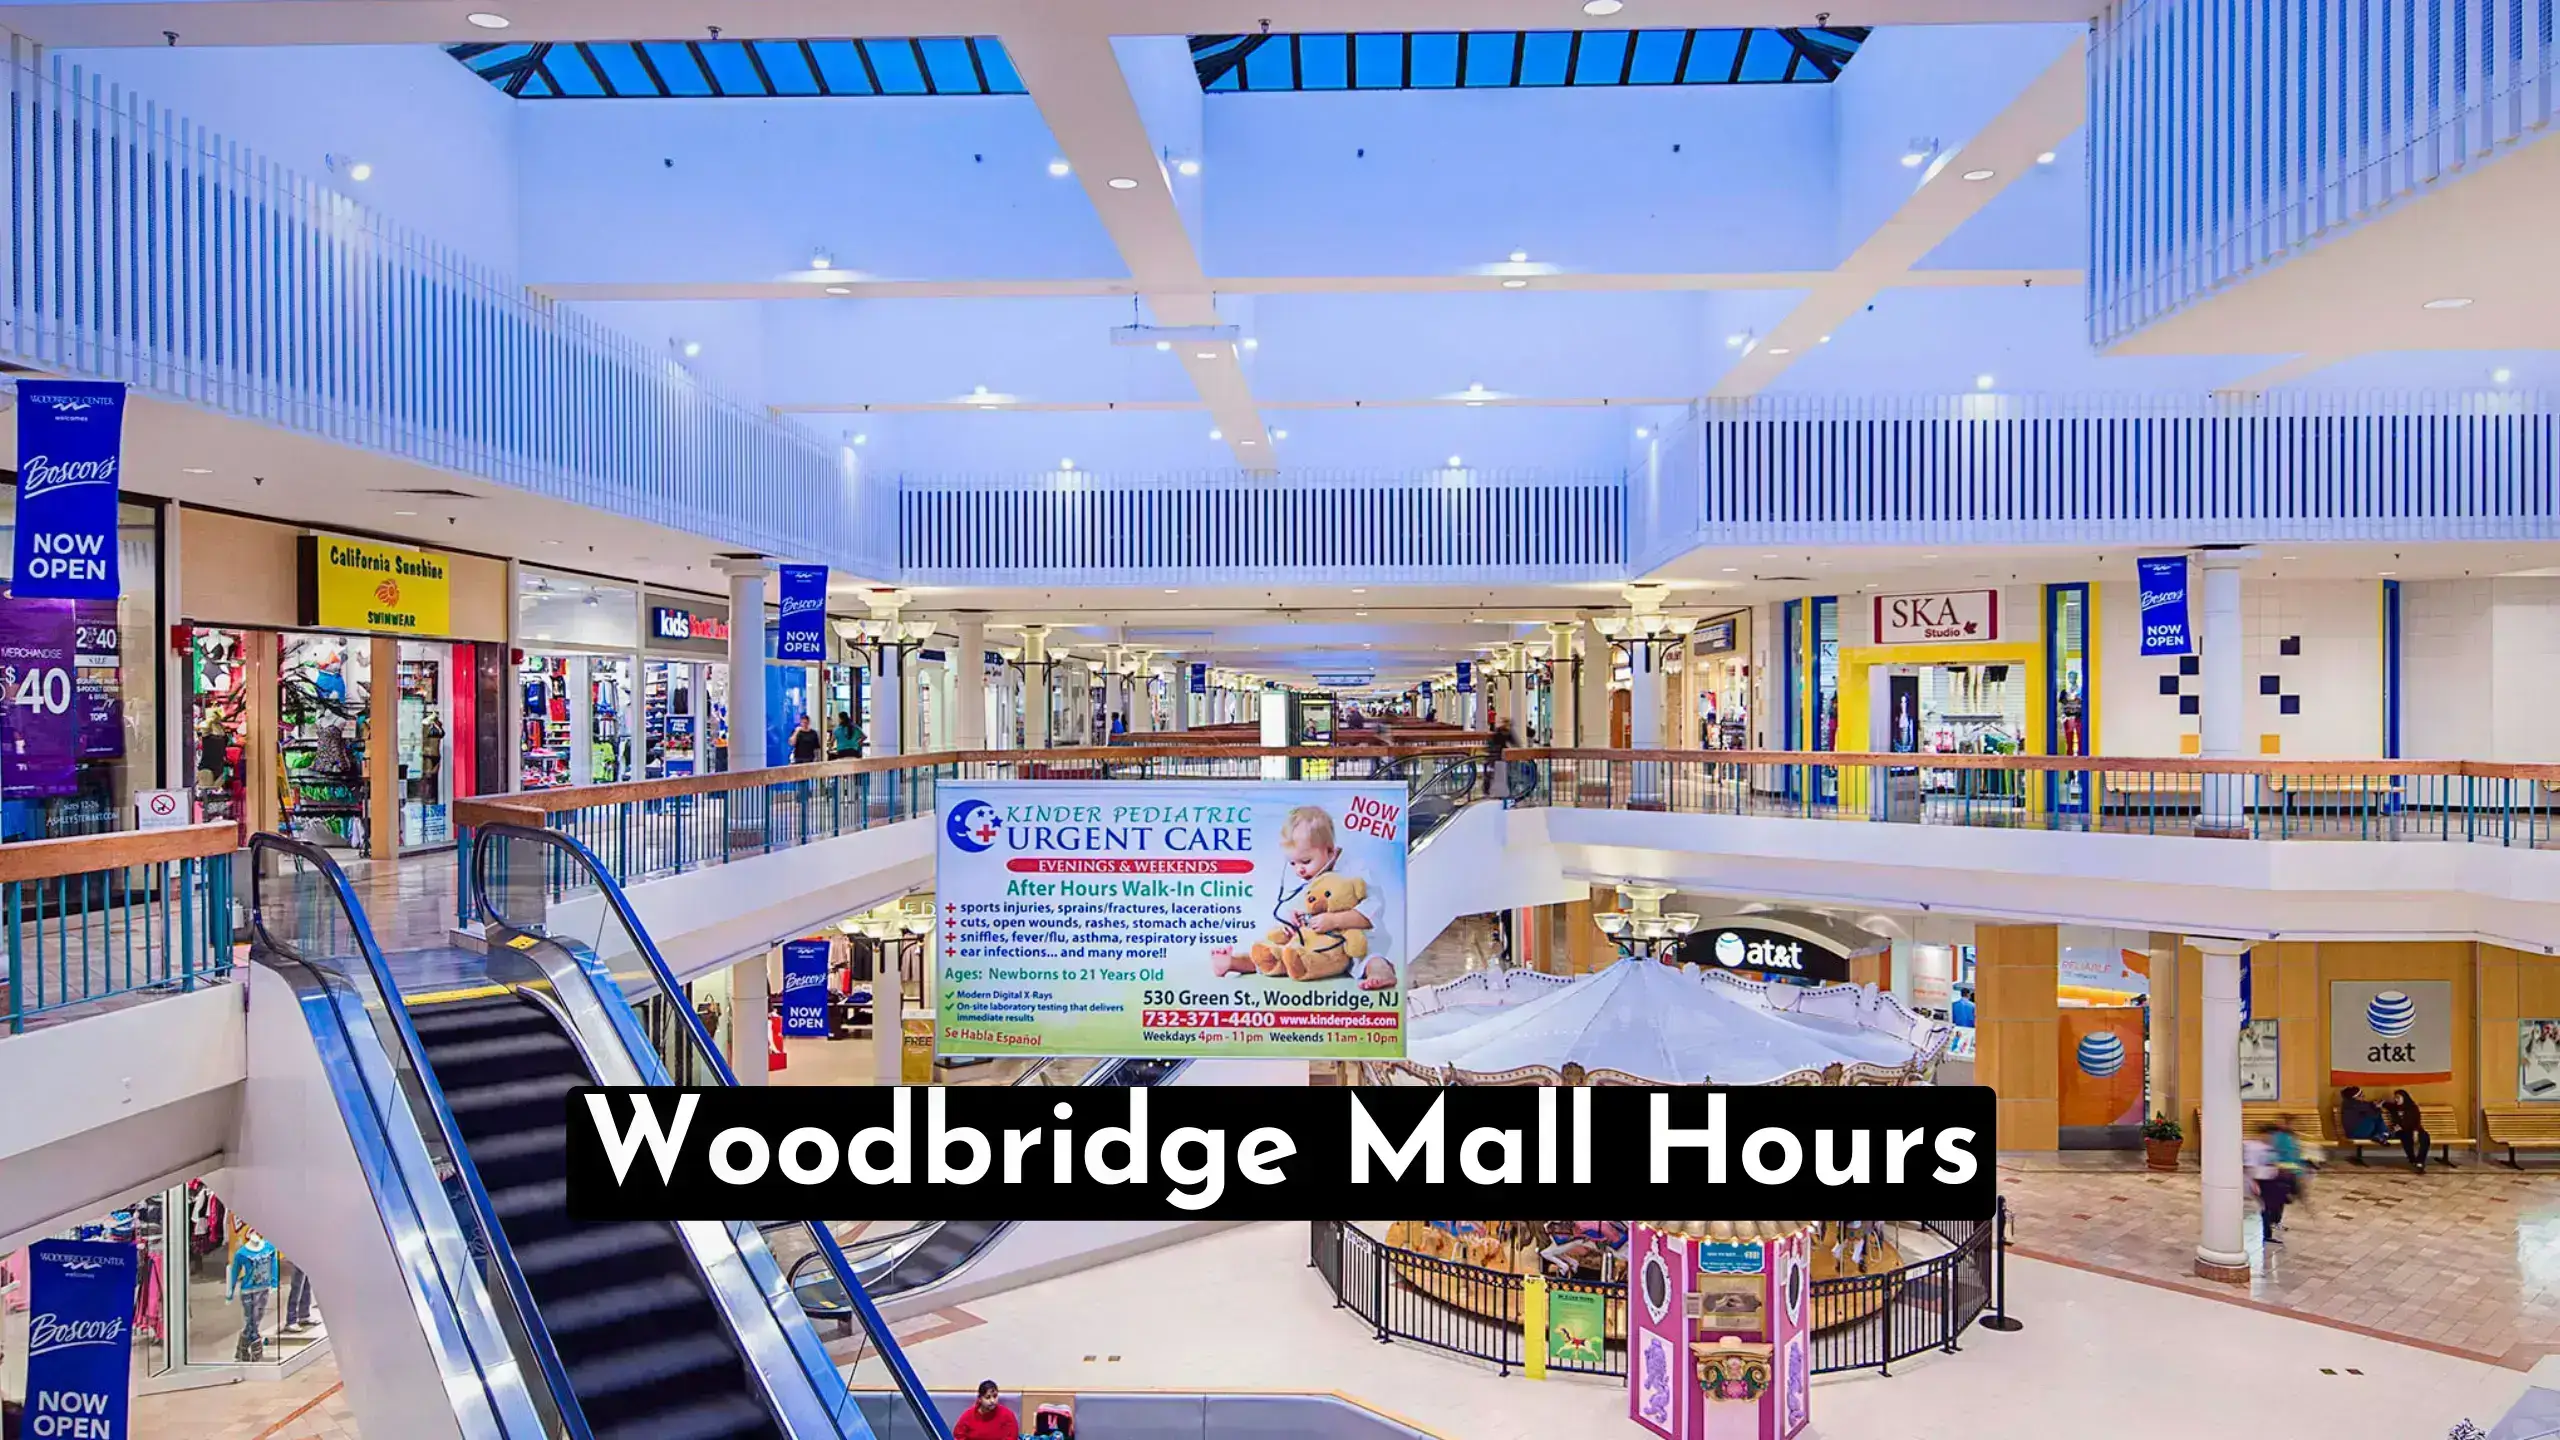 Find Woodbridge Mall Hours With unbeatable shopping Deals, stores, and food courts! Open daily, explore top stores & enjoy a retail paradise in NJ.